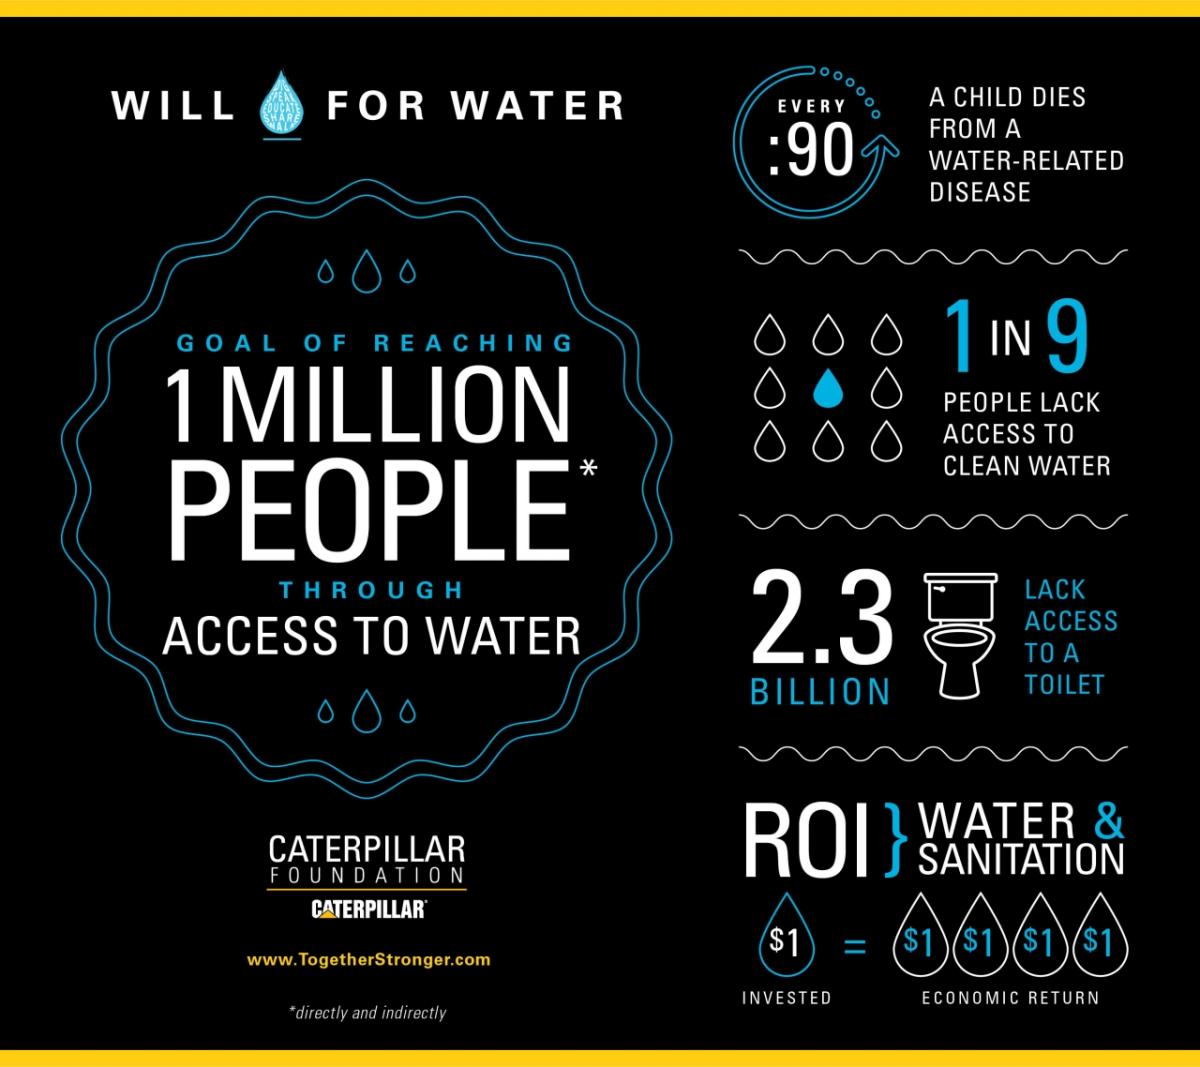 Caterpillar Foundation Launches Value of Water Campaign to Help Its ...